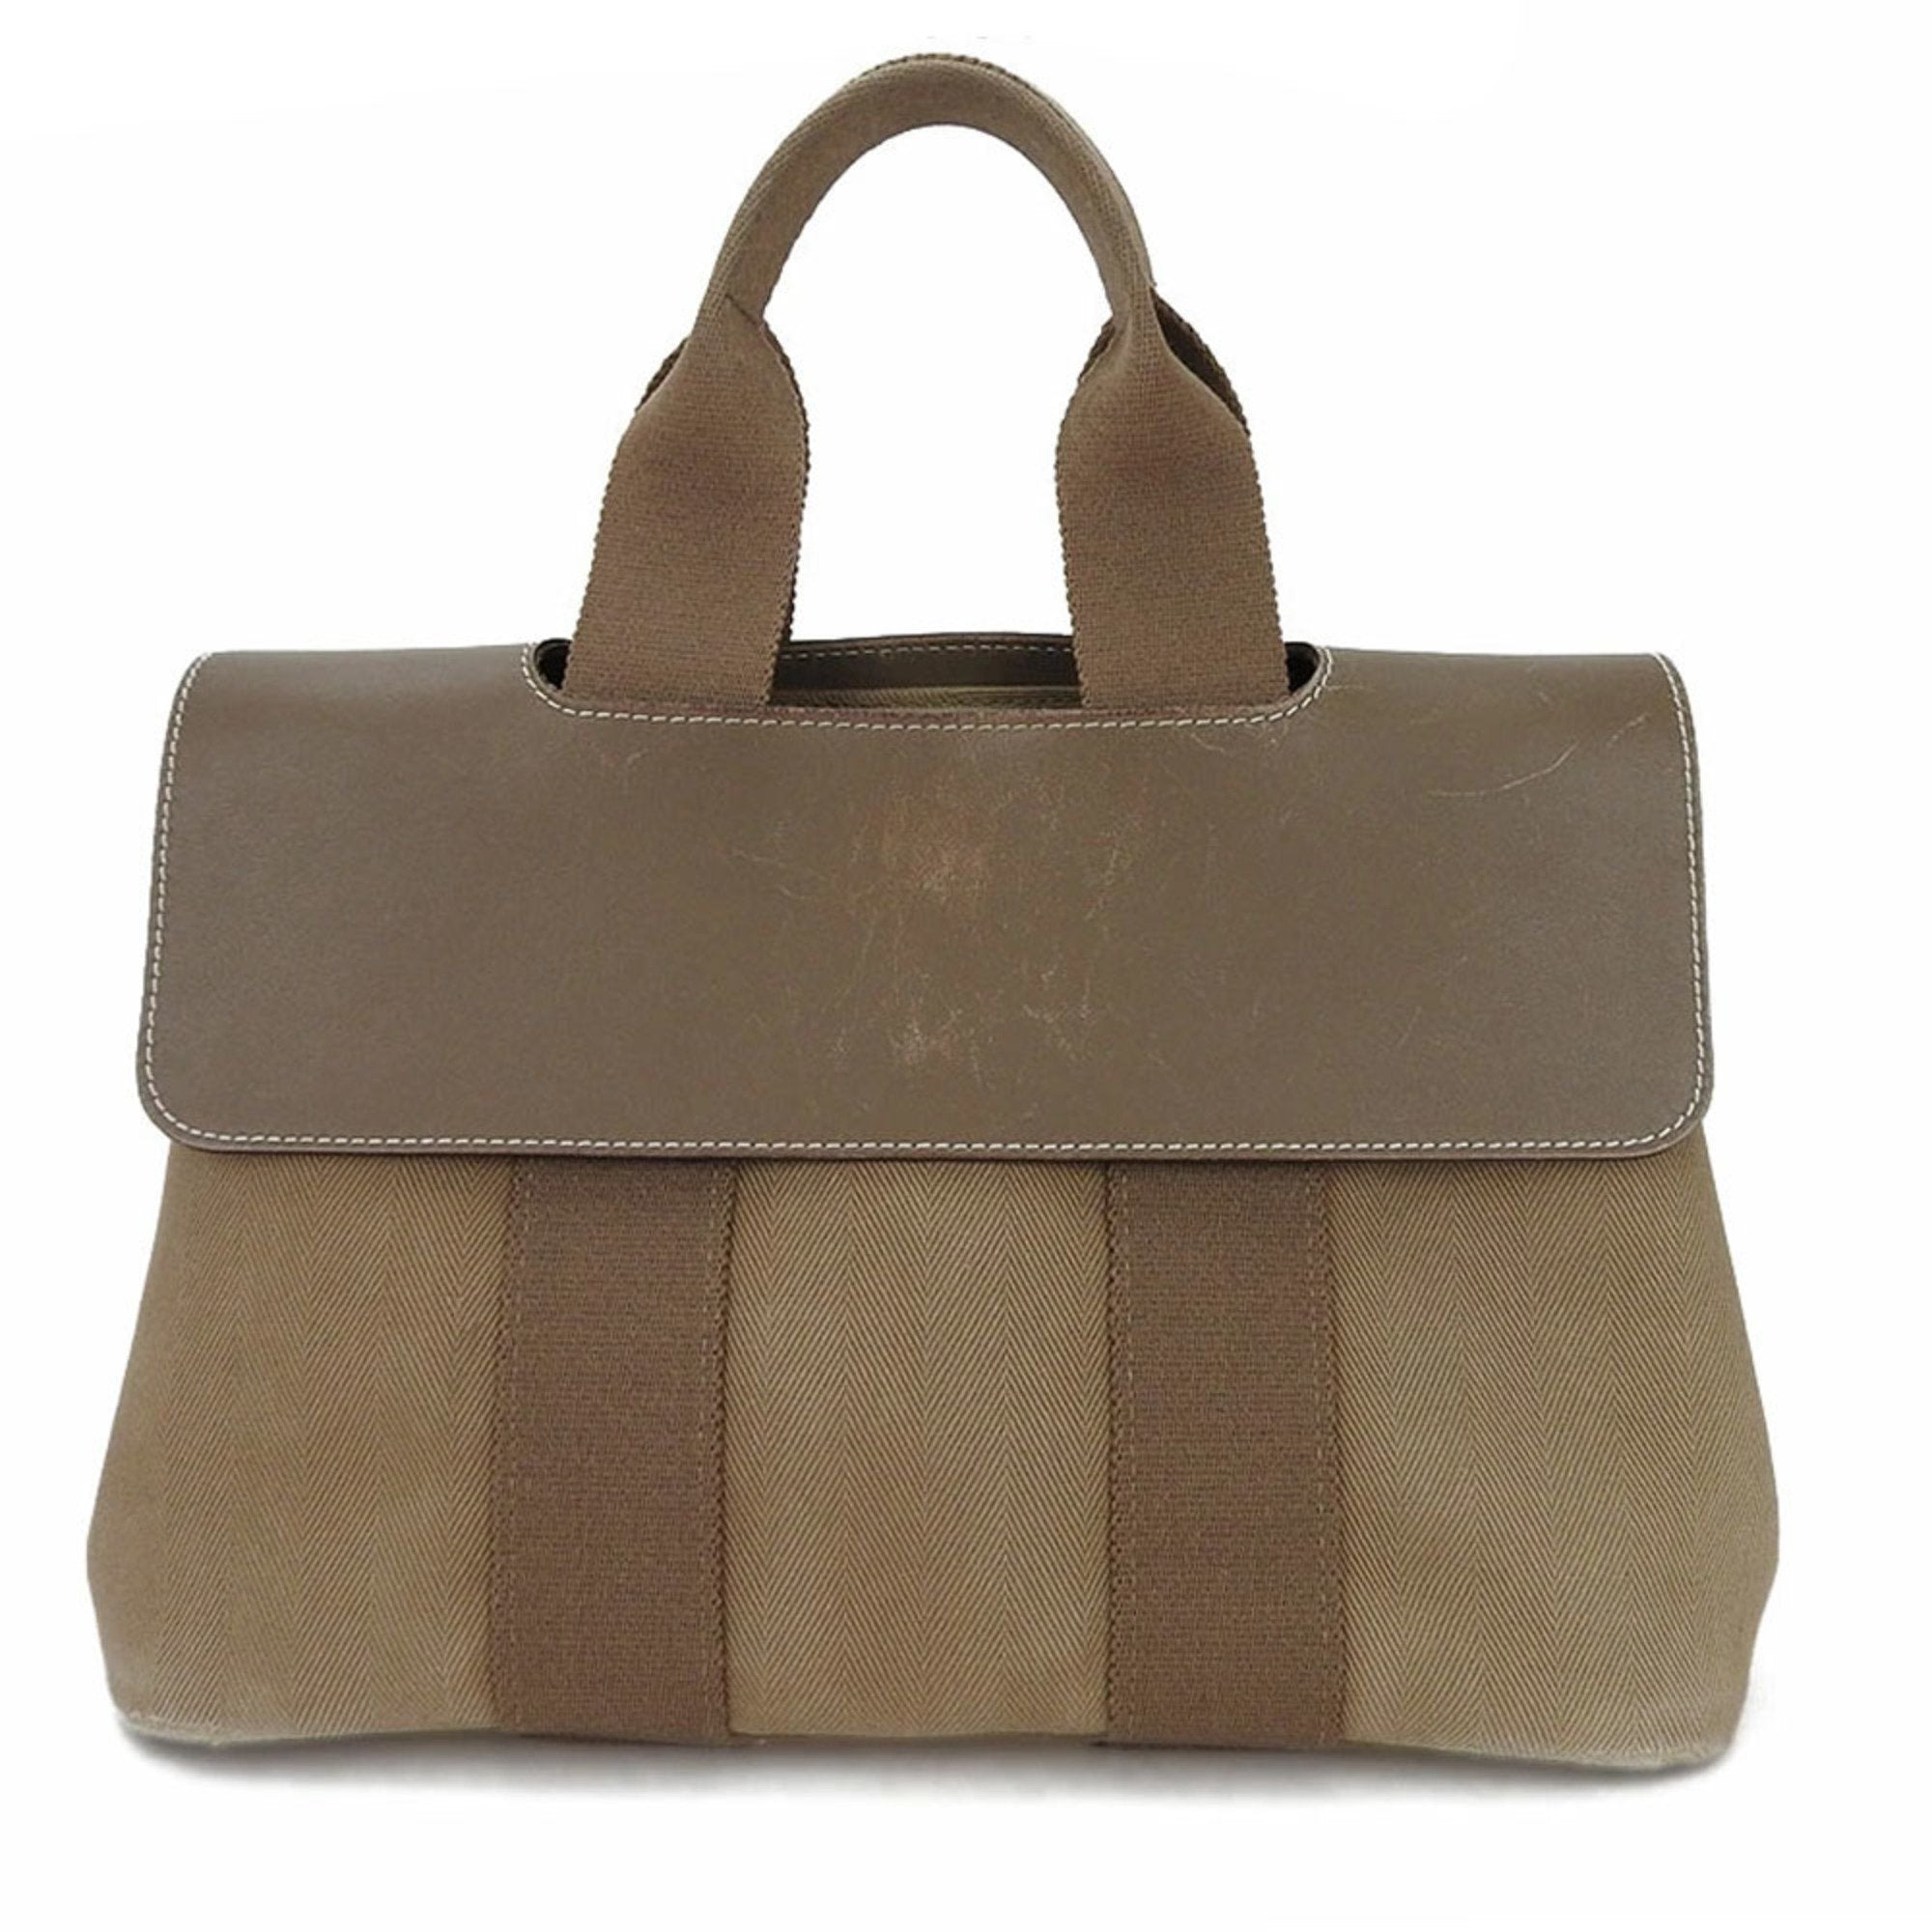 image of HERMES Hand Bag Boston Valparaiso PM Beige Canvas Leather